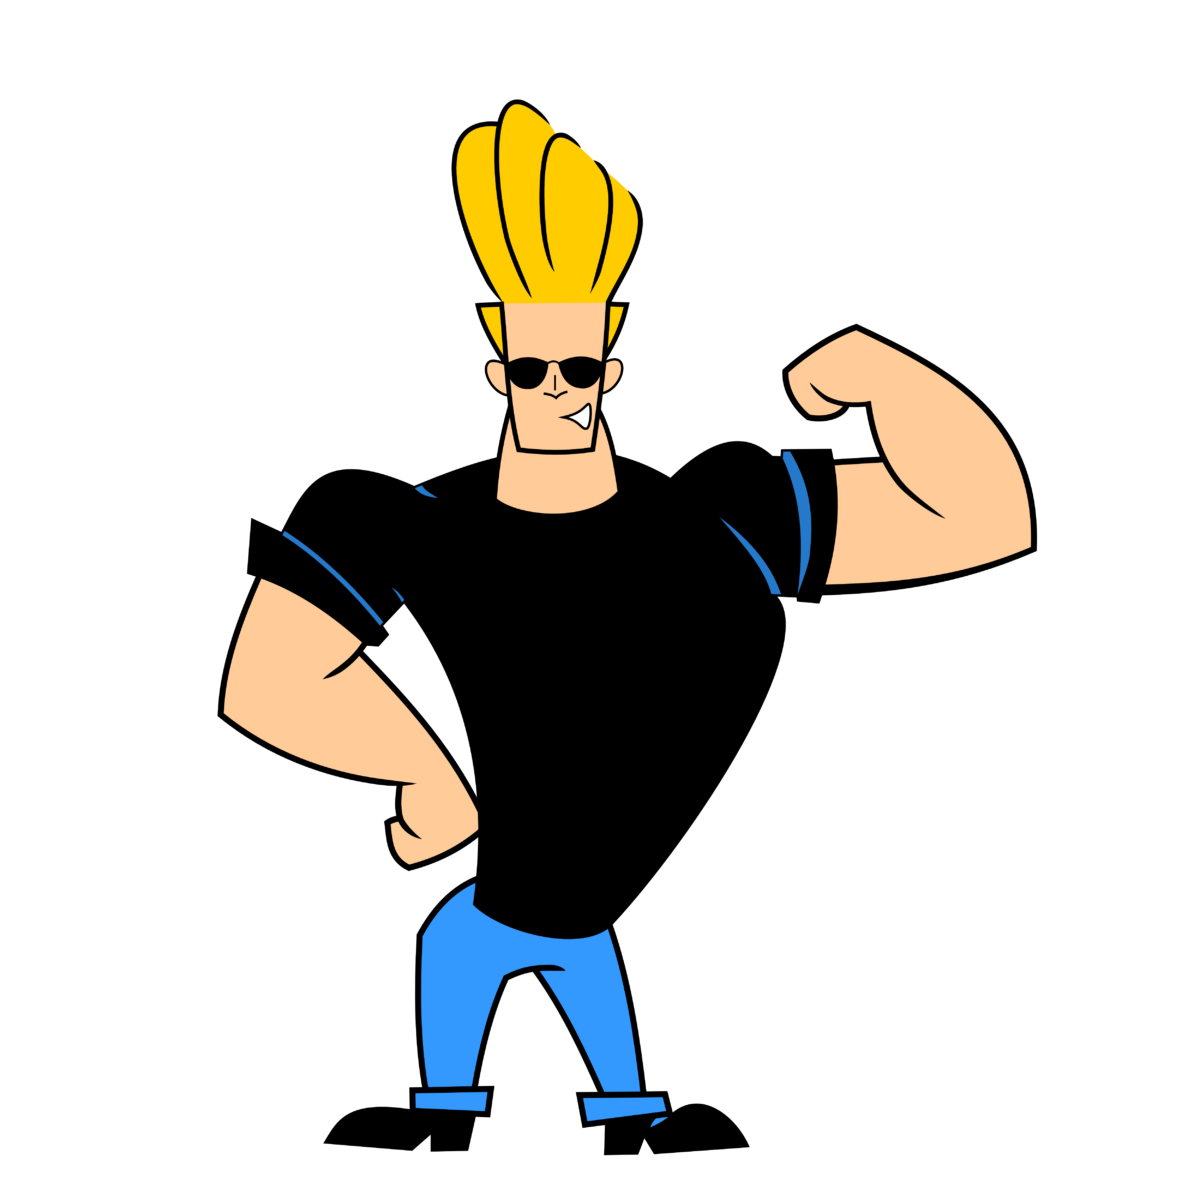 Johnny Bravo Wallpaper Hd Wallpapers Backgrounds High